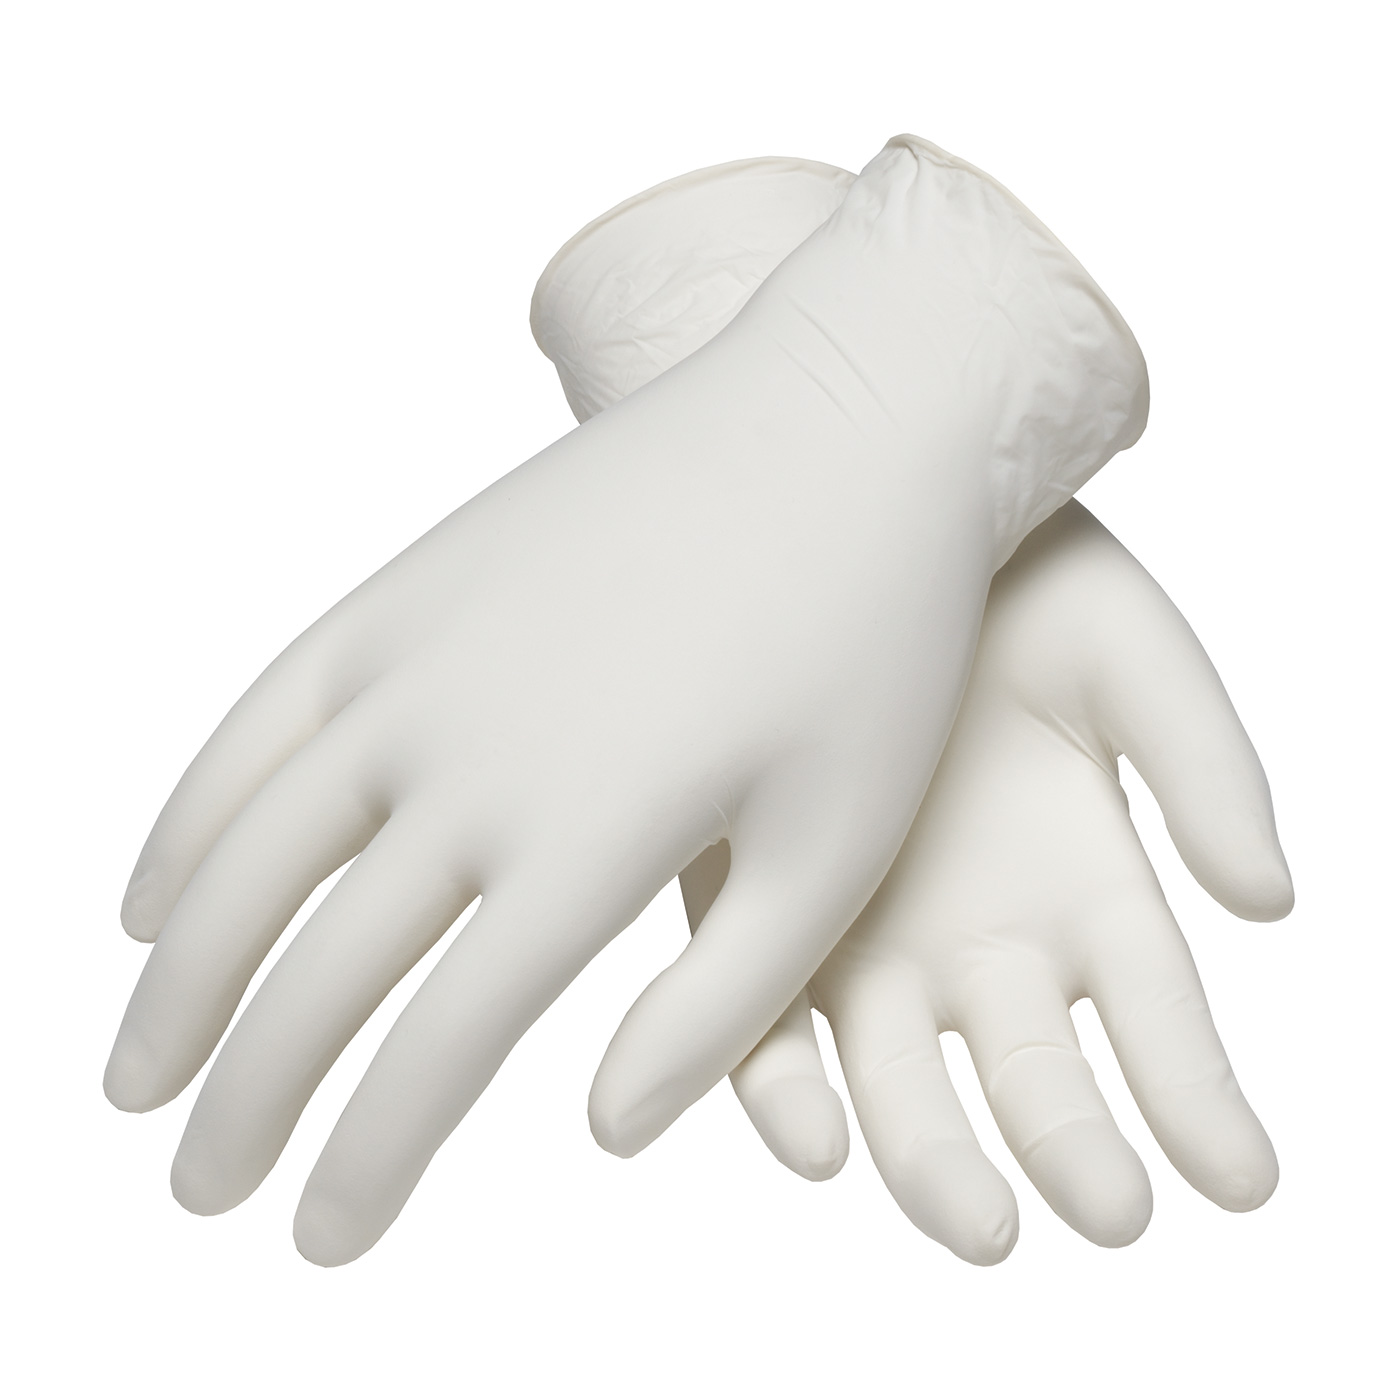 Ambi-dex Food Grade Disposable Latex Free Glove - 64-346 - 50 Pairs from Columbia Safety